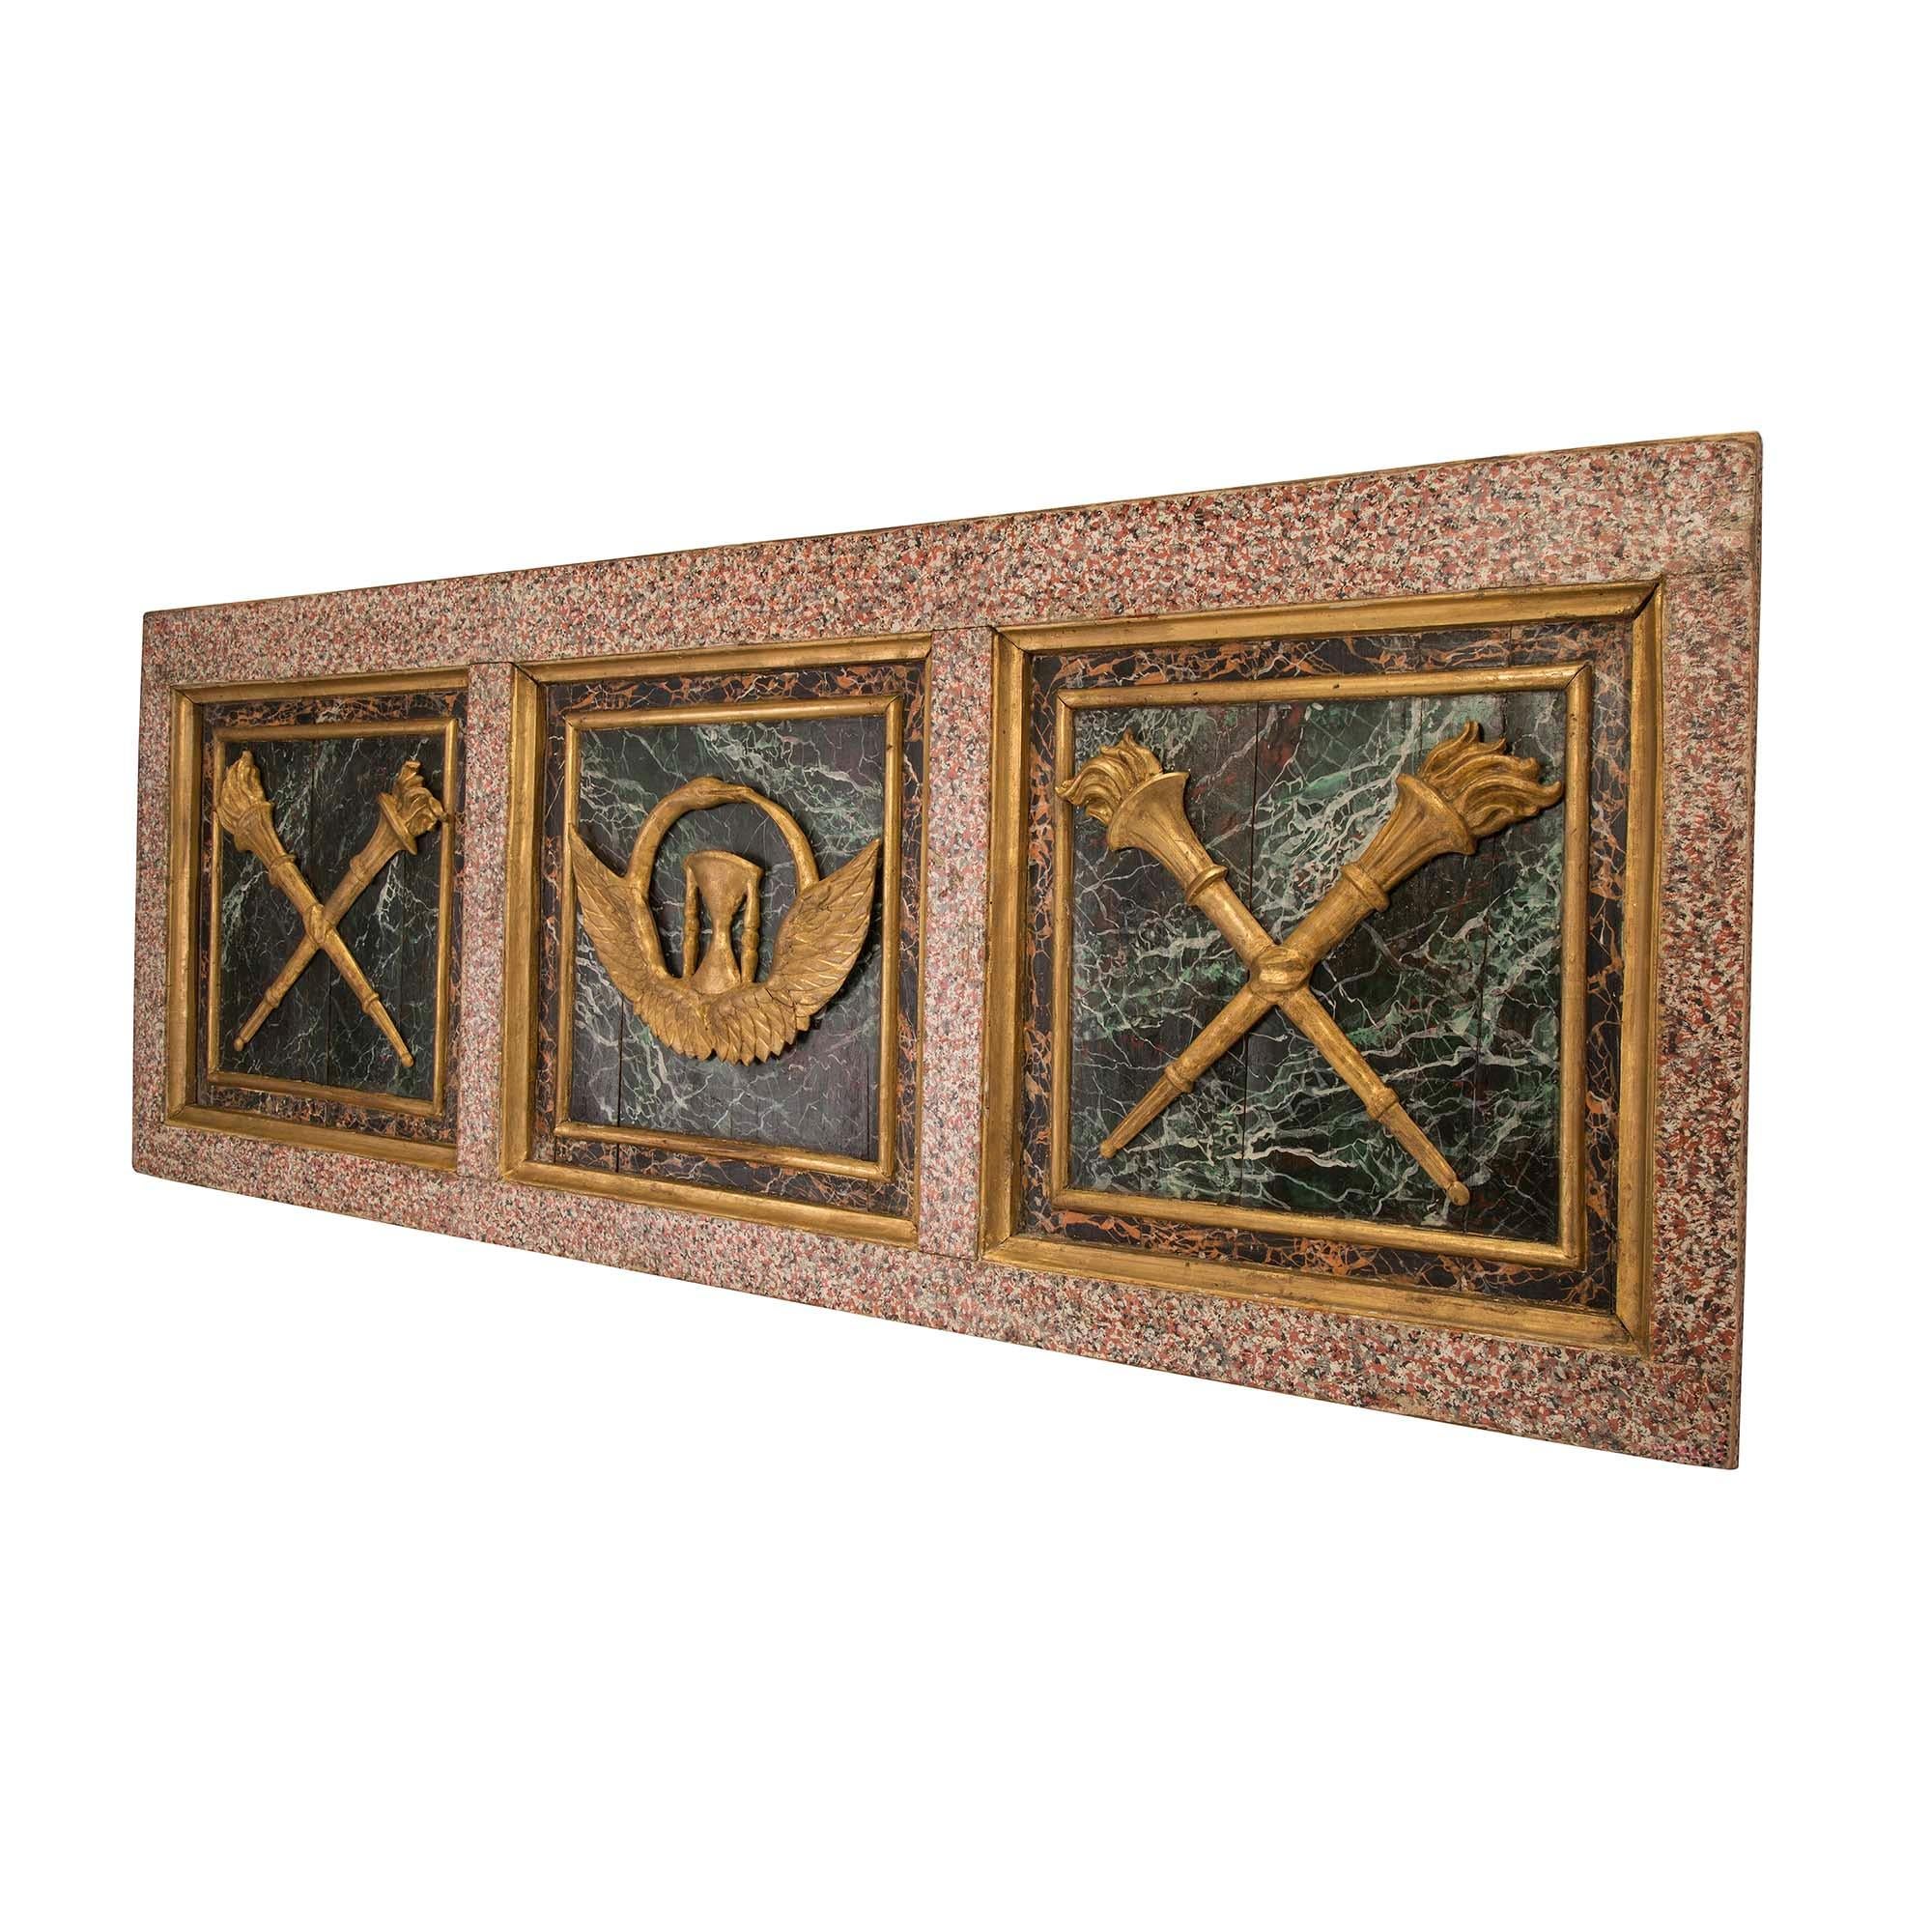 An extremely decorative pair of Italian early 19th century Louis XVI st. faux marble and giltwood wall panels. Each panel displays a wonderfully executed faux granite border with three central recessed squares. Each square is framed within a fine